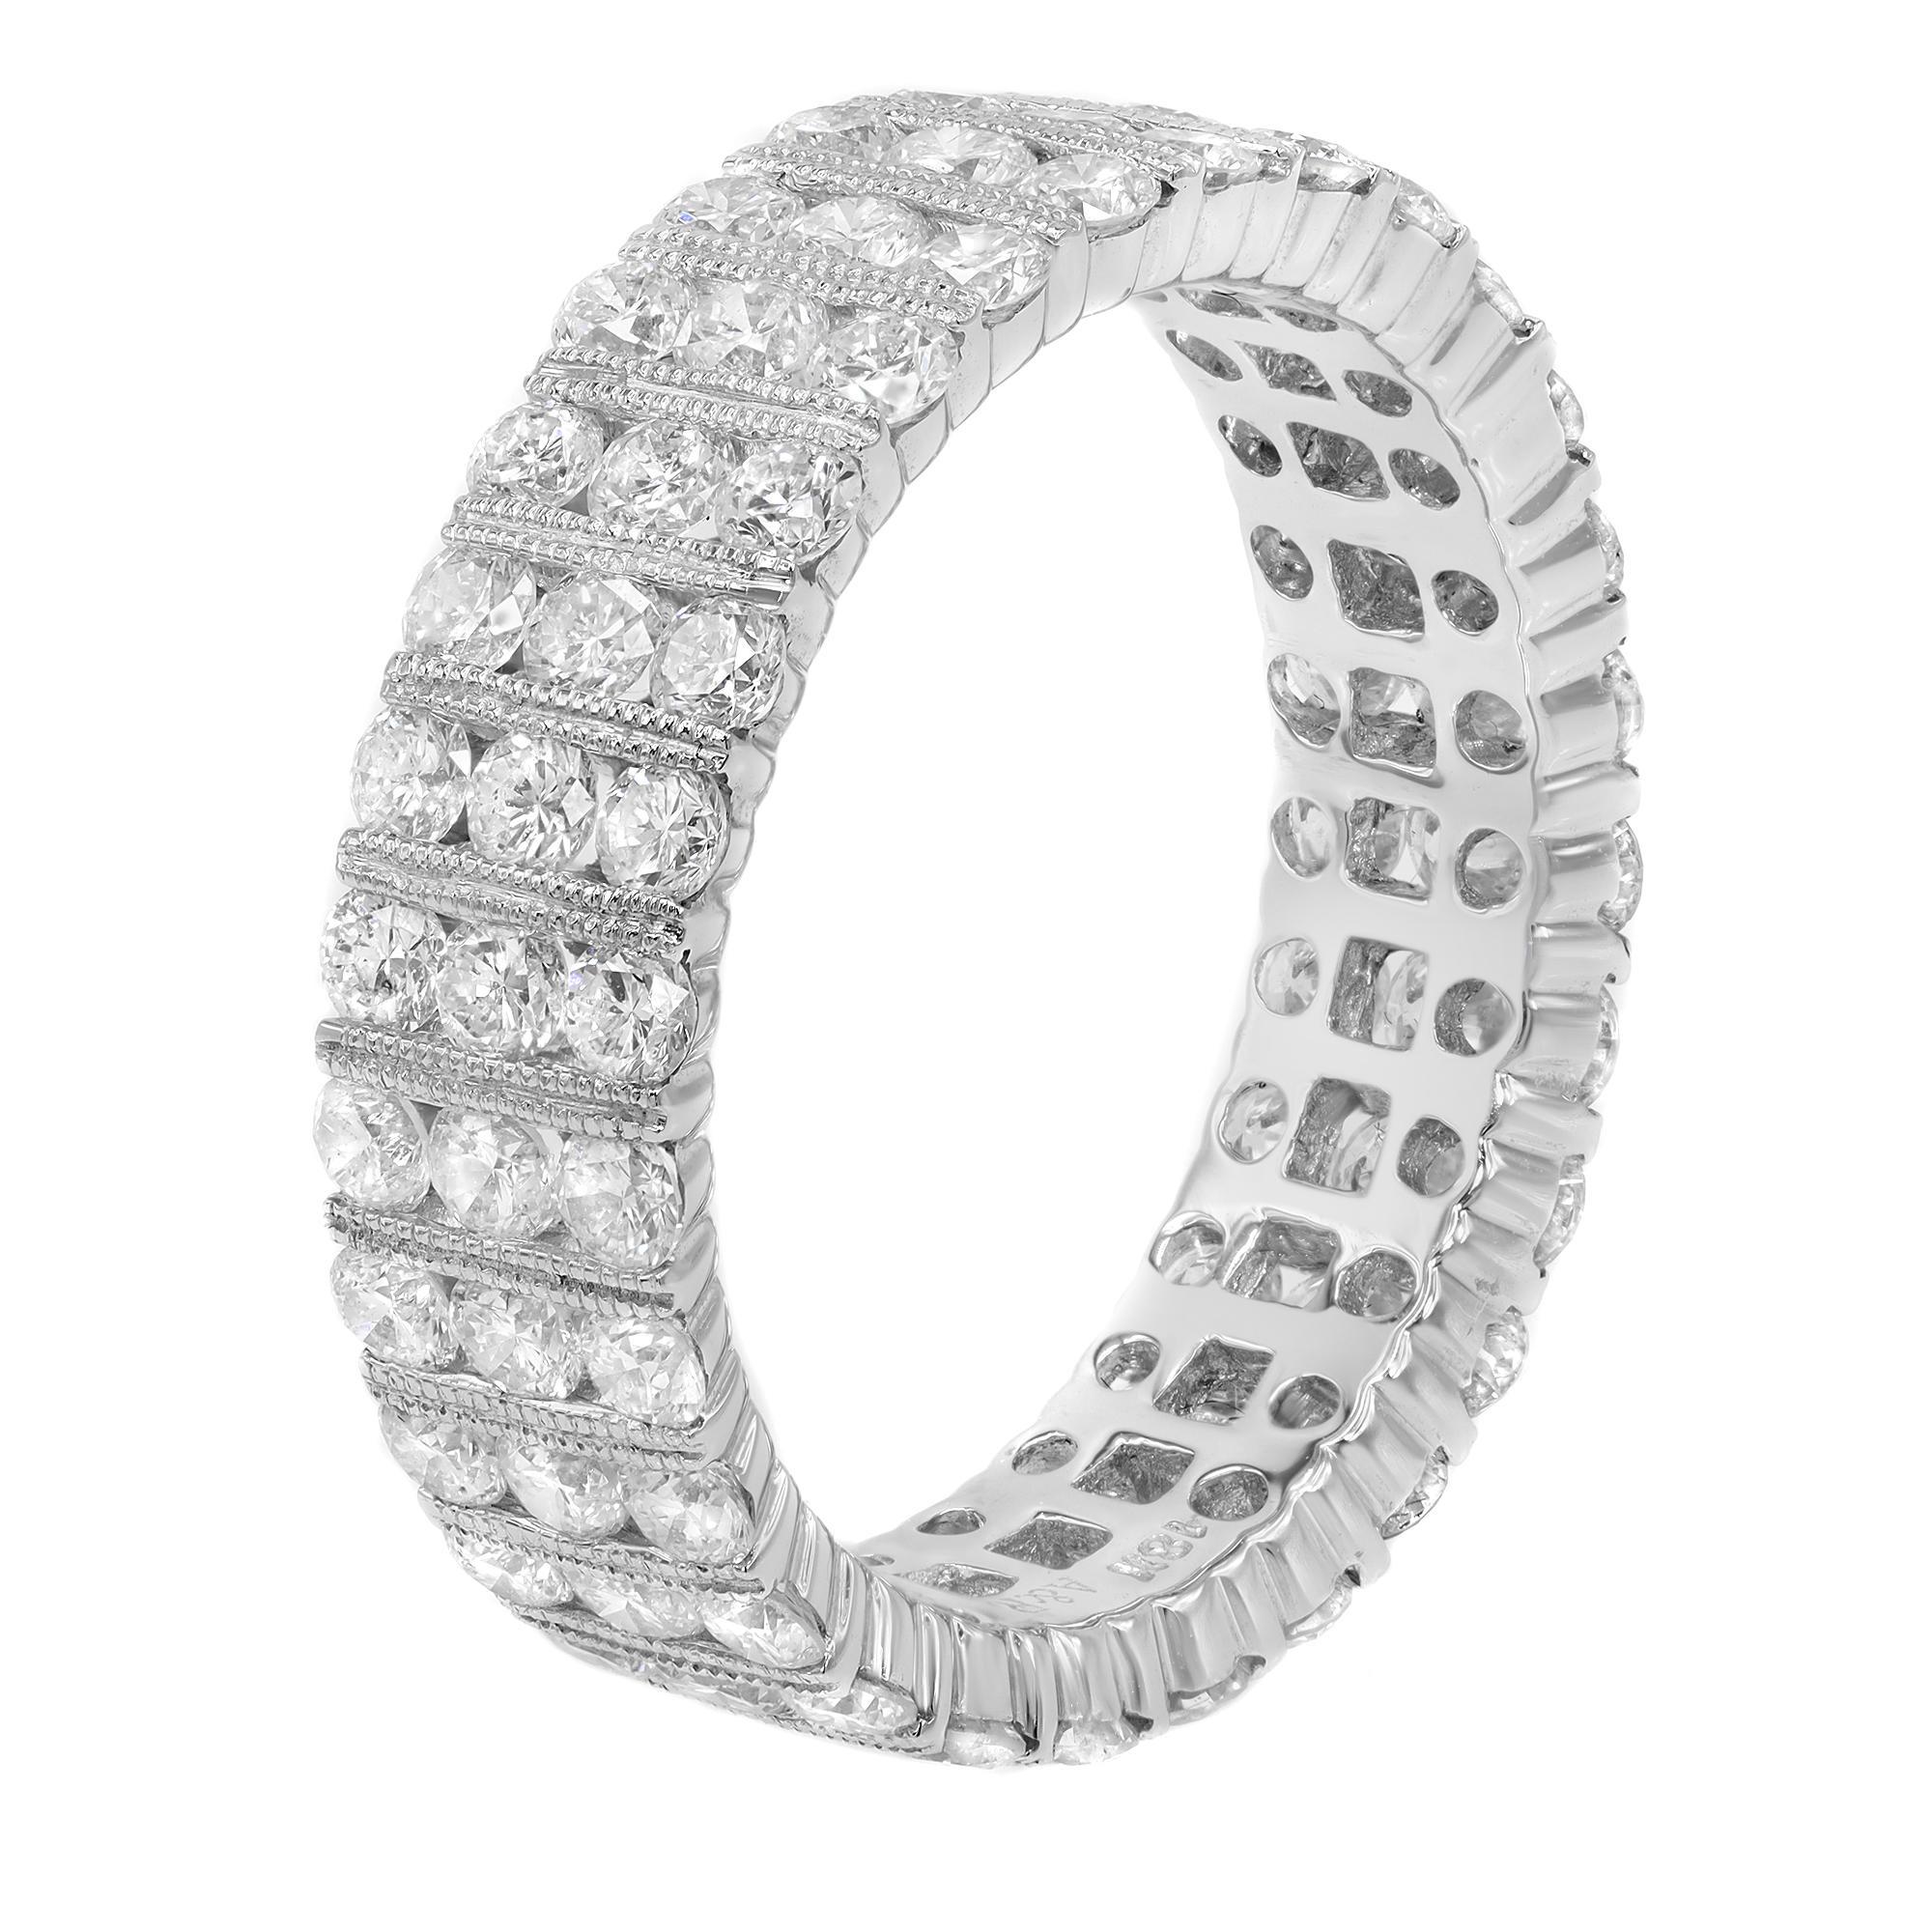 Three rows of sparkling white round cut diamonds are showcased on this triple row band. Wear as a wedding or anniversary band. Total carat weight: 2.57. Diamond color G and VS clarity. Ring size 7. Width of the band: 6.00mm. Comes with a presentable